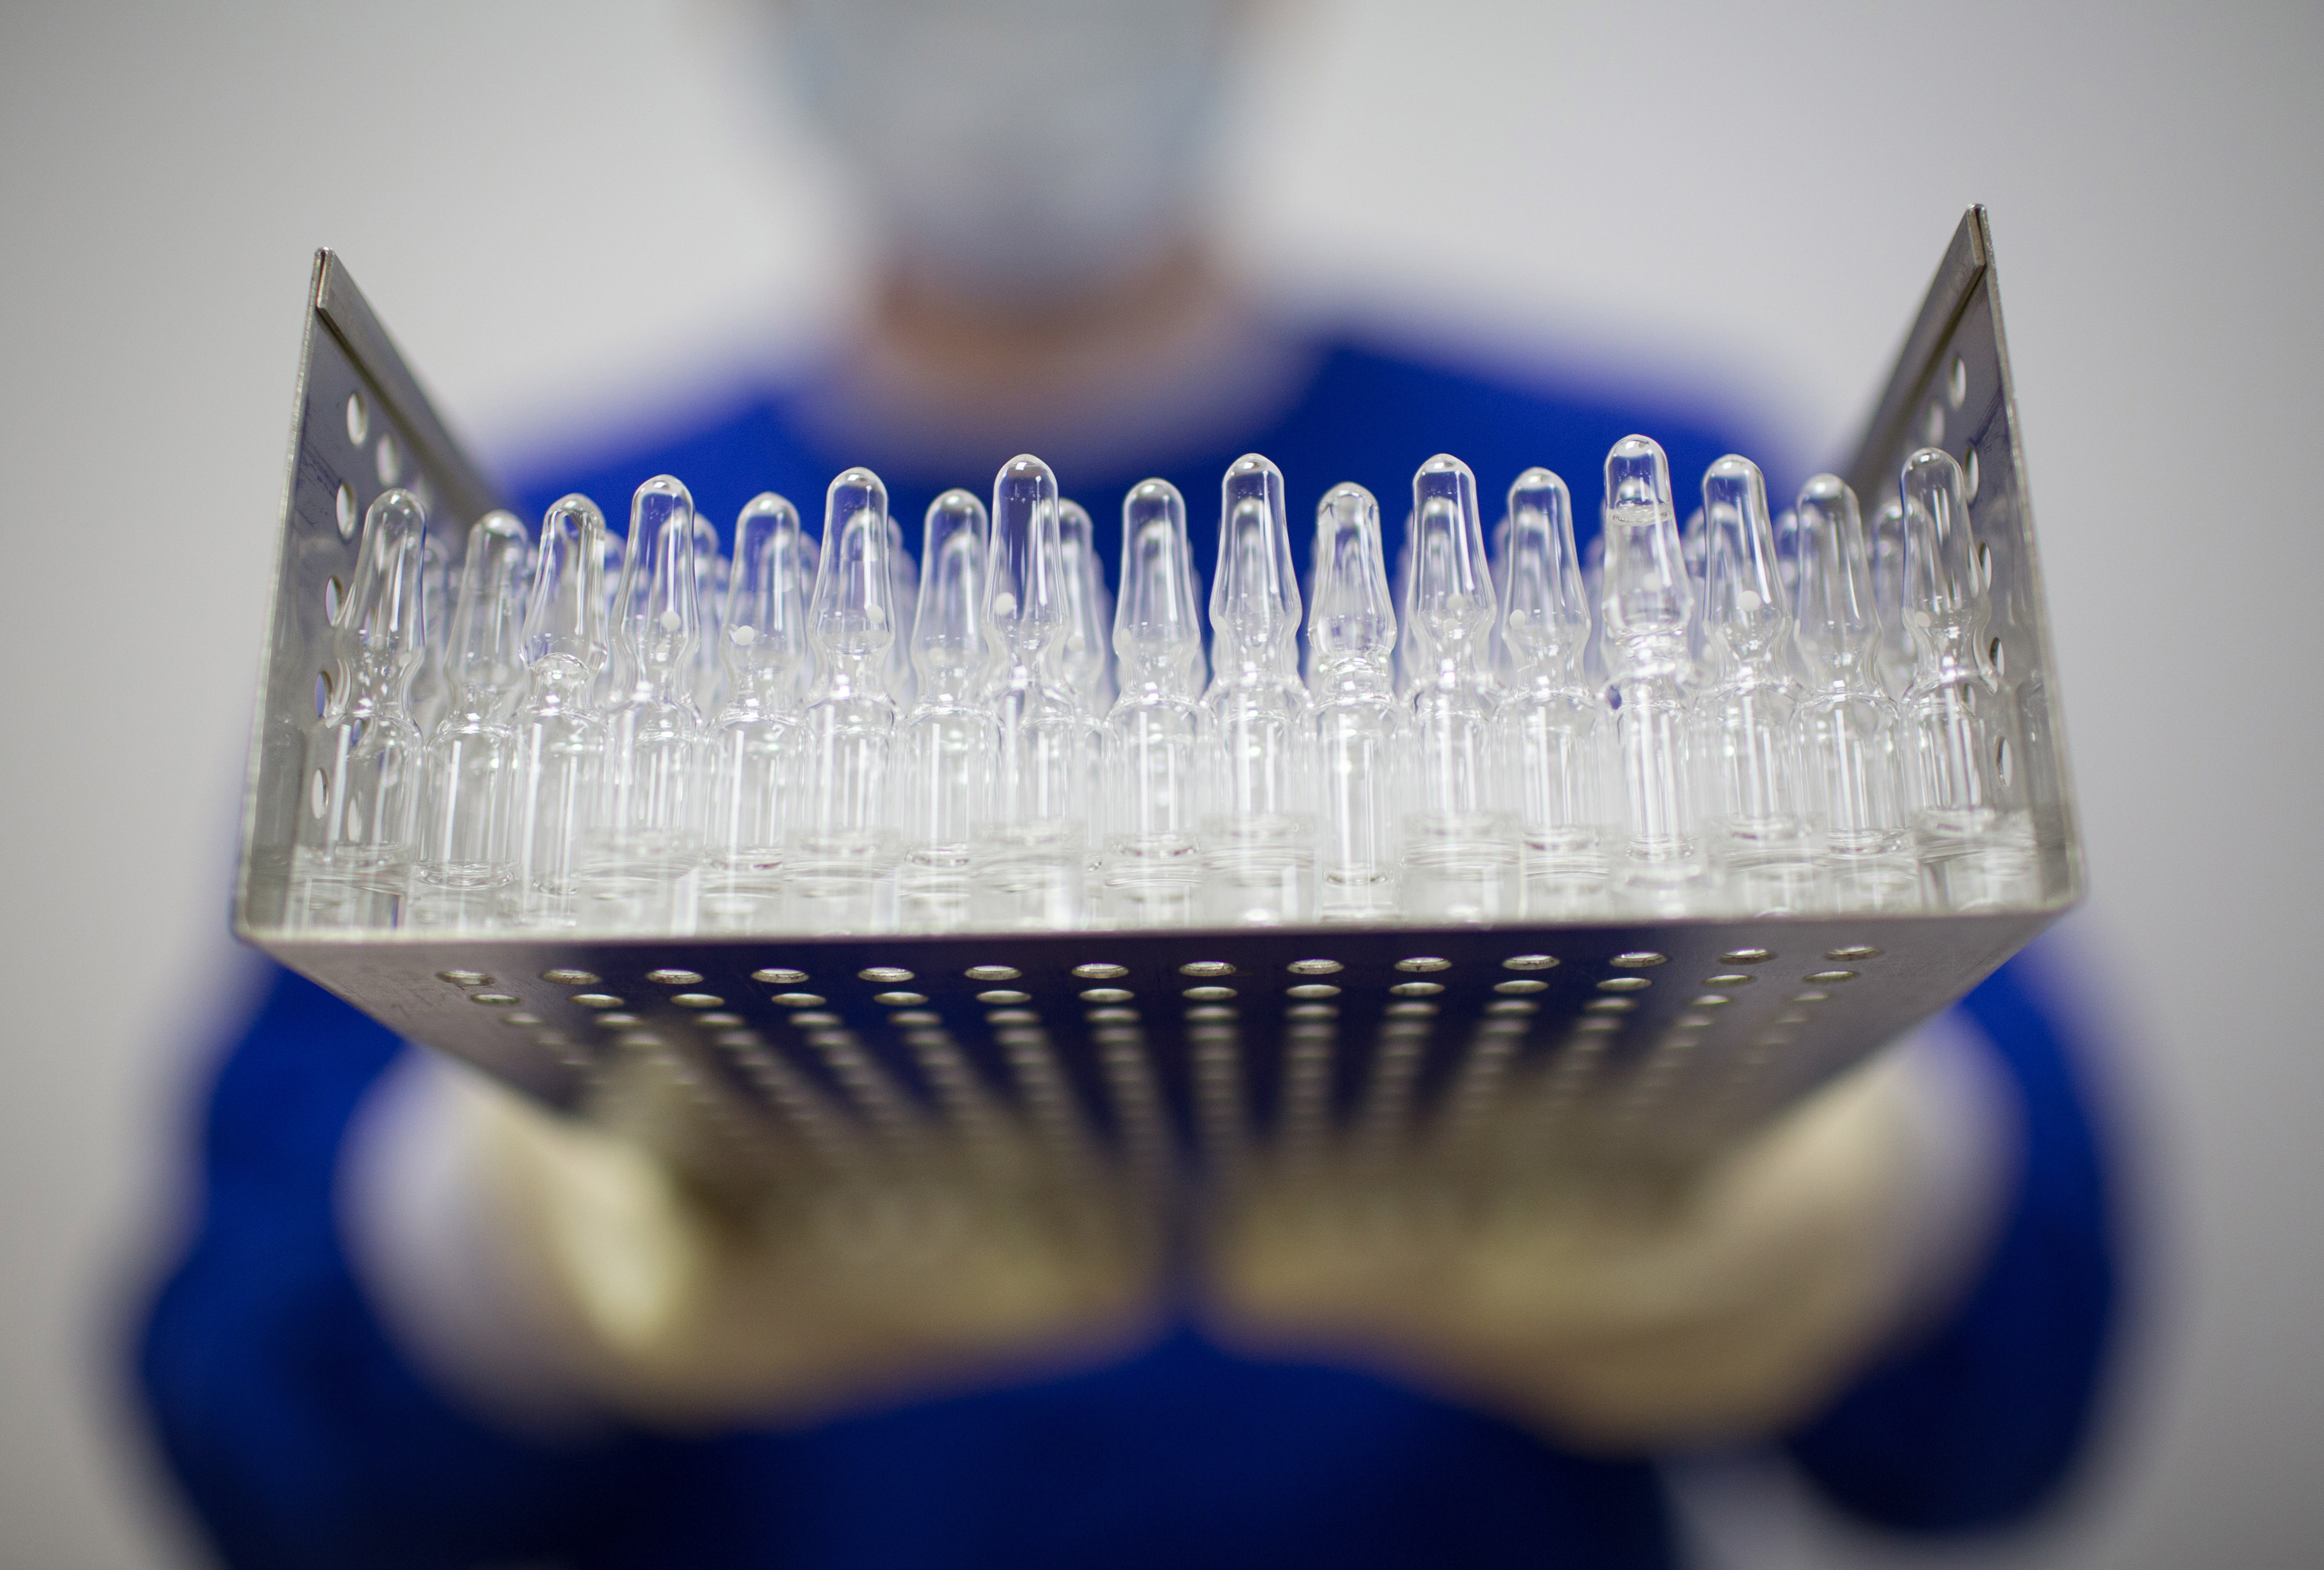 A worker wearing personal protective equipment (PPE) holds a tray containing unlabeled ampoules of the 'Gam-COVID-Vac' COVID-19 vaccine, developed by the Gamaleya National Research Center for Epidemiology and Microbiology and the Russian Direct Investment Fund (RDIF), at JSC Binnopharm pharmaceutical complex, operated by Sistema PJSFC, in Zelenograd, Russia, on Friday, Aug. 7, 2020. Russia registered its first coronavirusÂ vaccine, developed by the Gamaleya Institute and the Russian Direct Investment Fund, President Vladimir Putin said during a televised meeting with the government. Photographer: Andrey Rudakov/Bloomberg via Getty Images